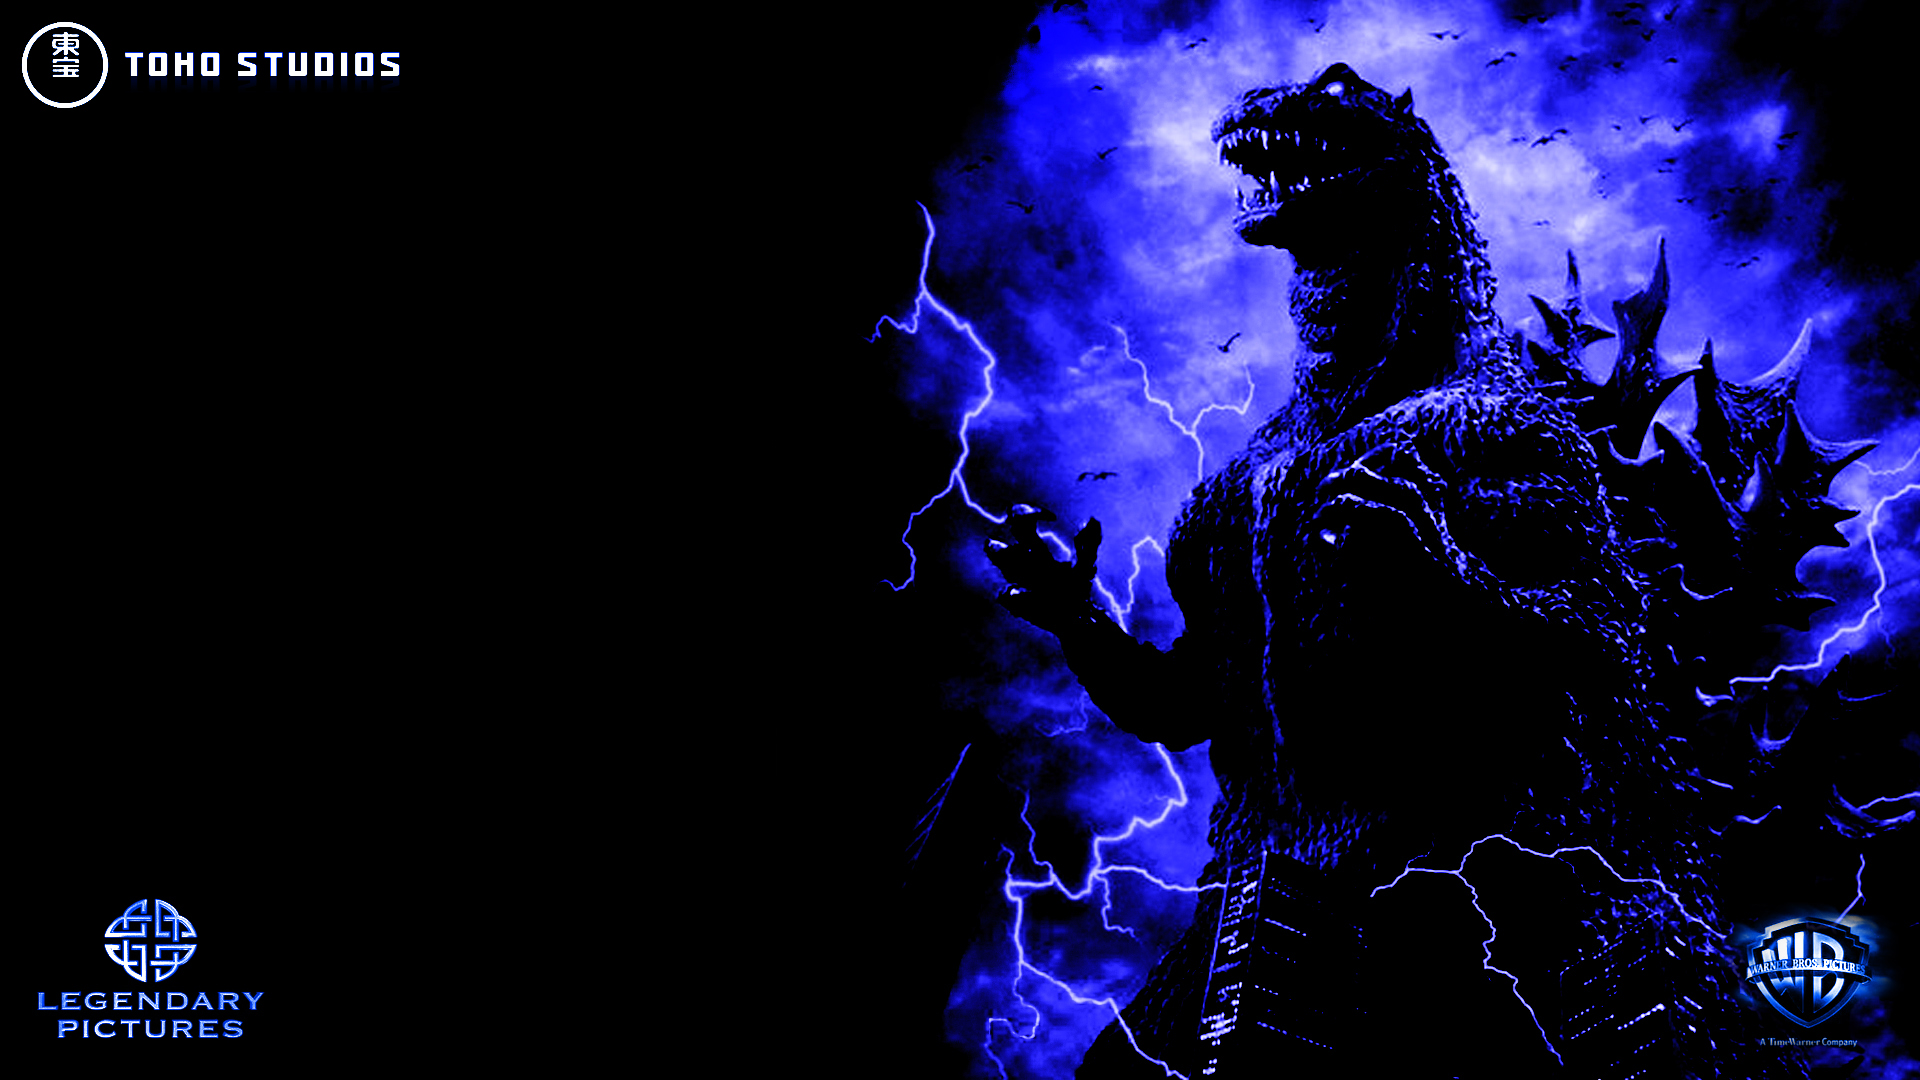 Legendary Pictures Godzilla by SeanSumagaysay on